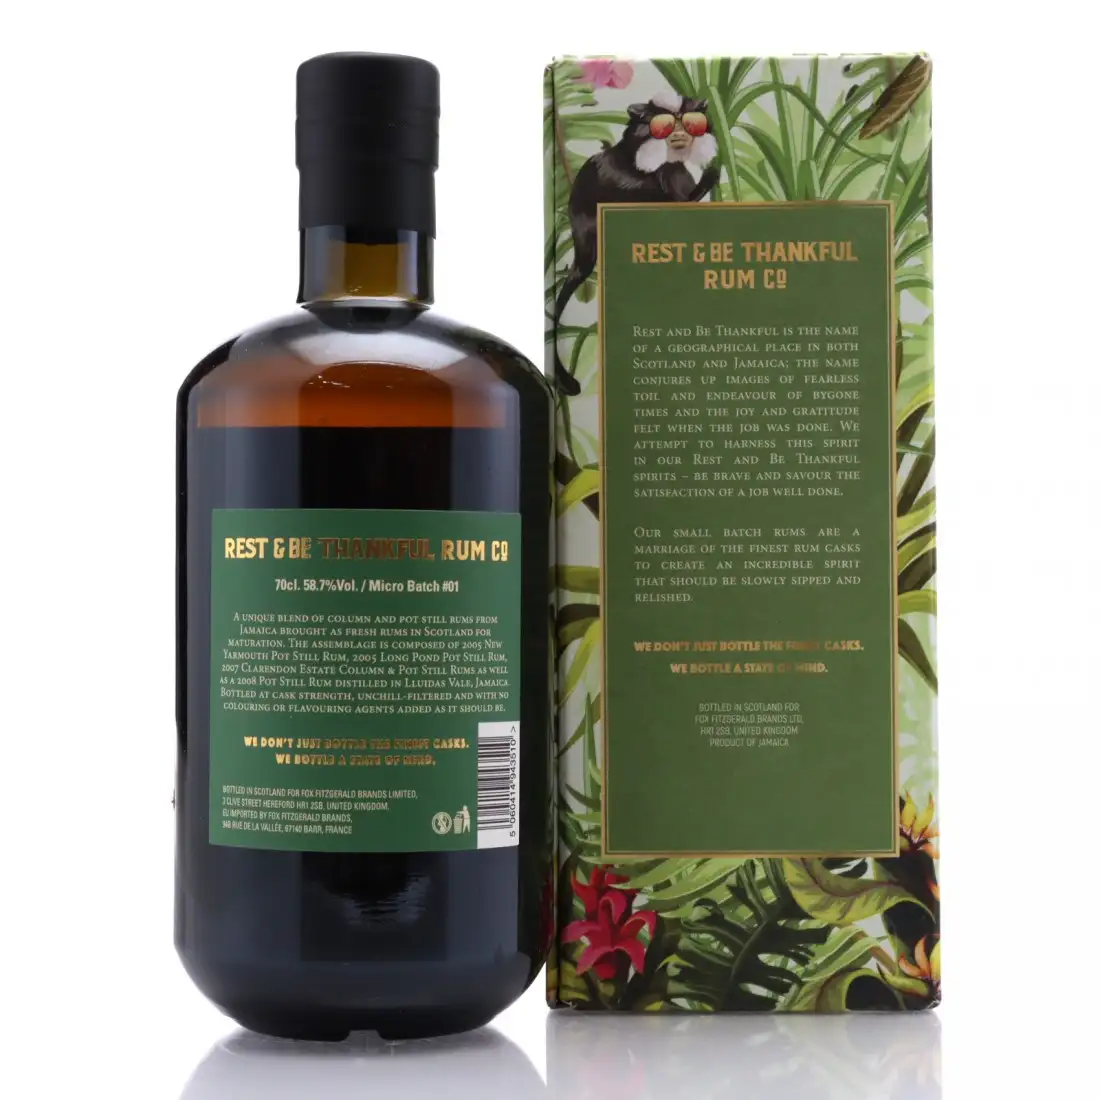 Image of the front of the bottle of the rum MICRO BATCH #1 Jamaican Rum Antipodes